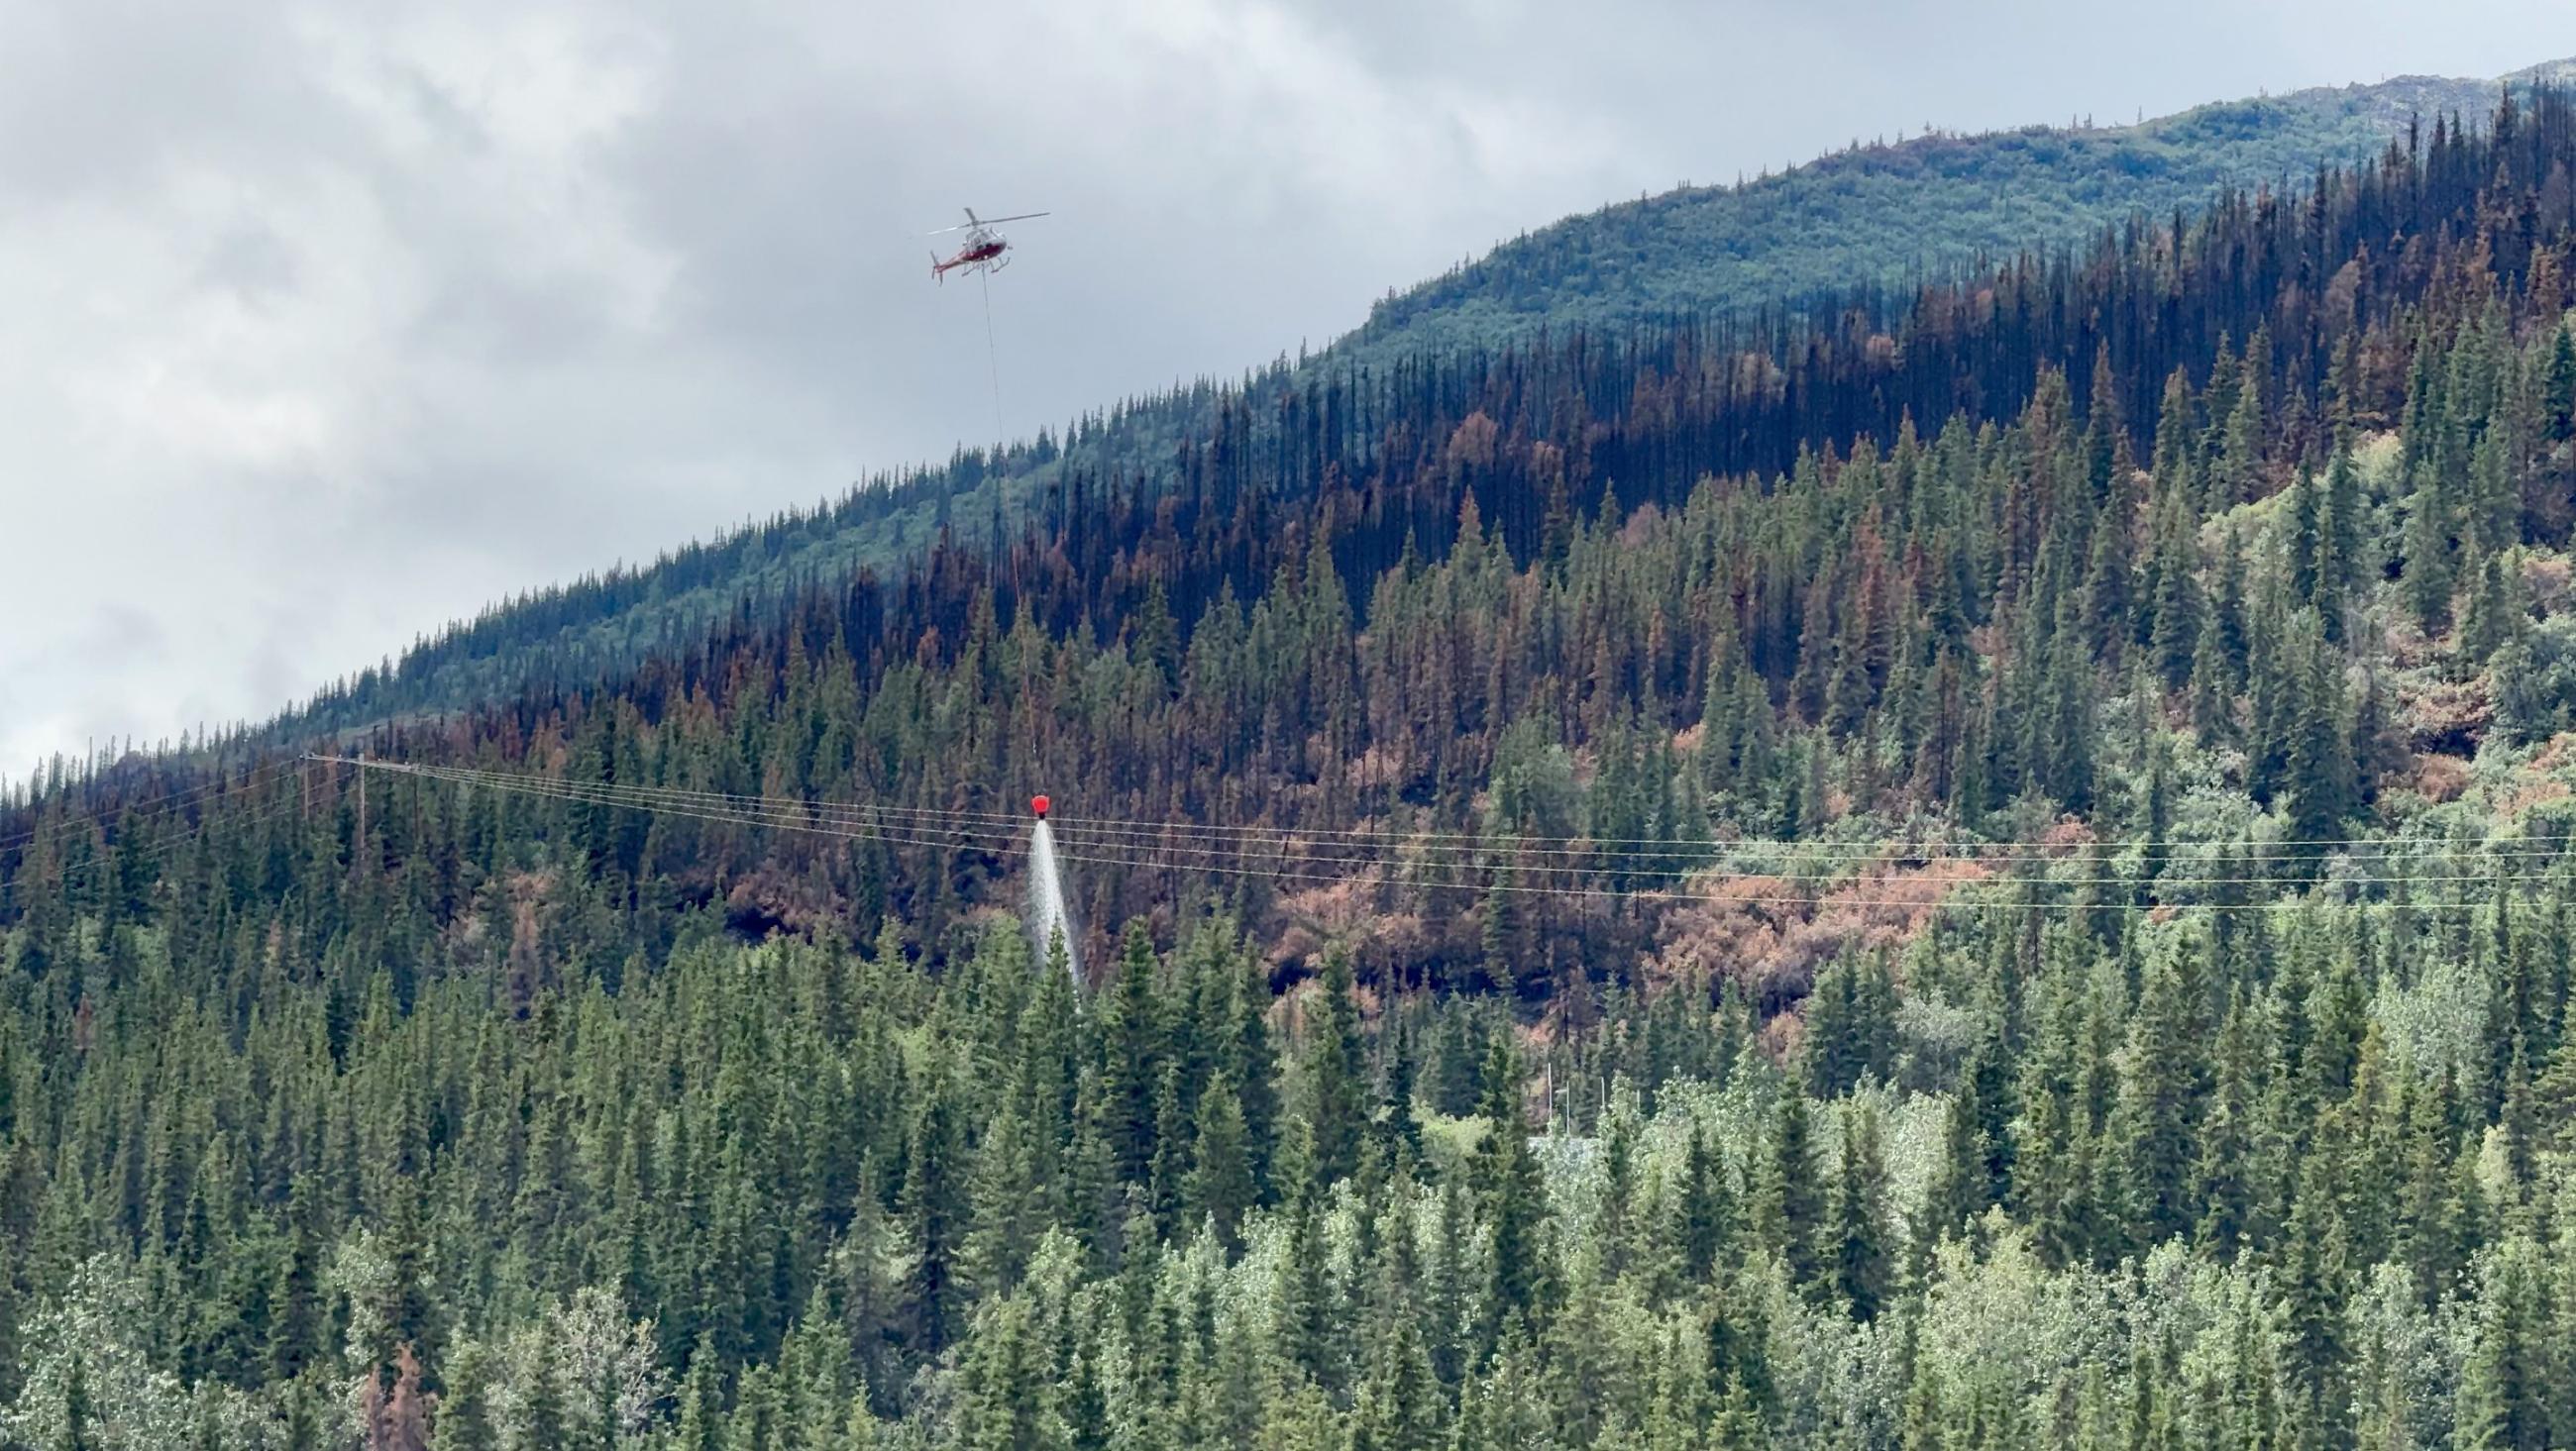 A helicopter making a water drop on the edge of the fire along the powerline corridor.